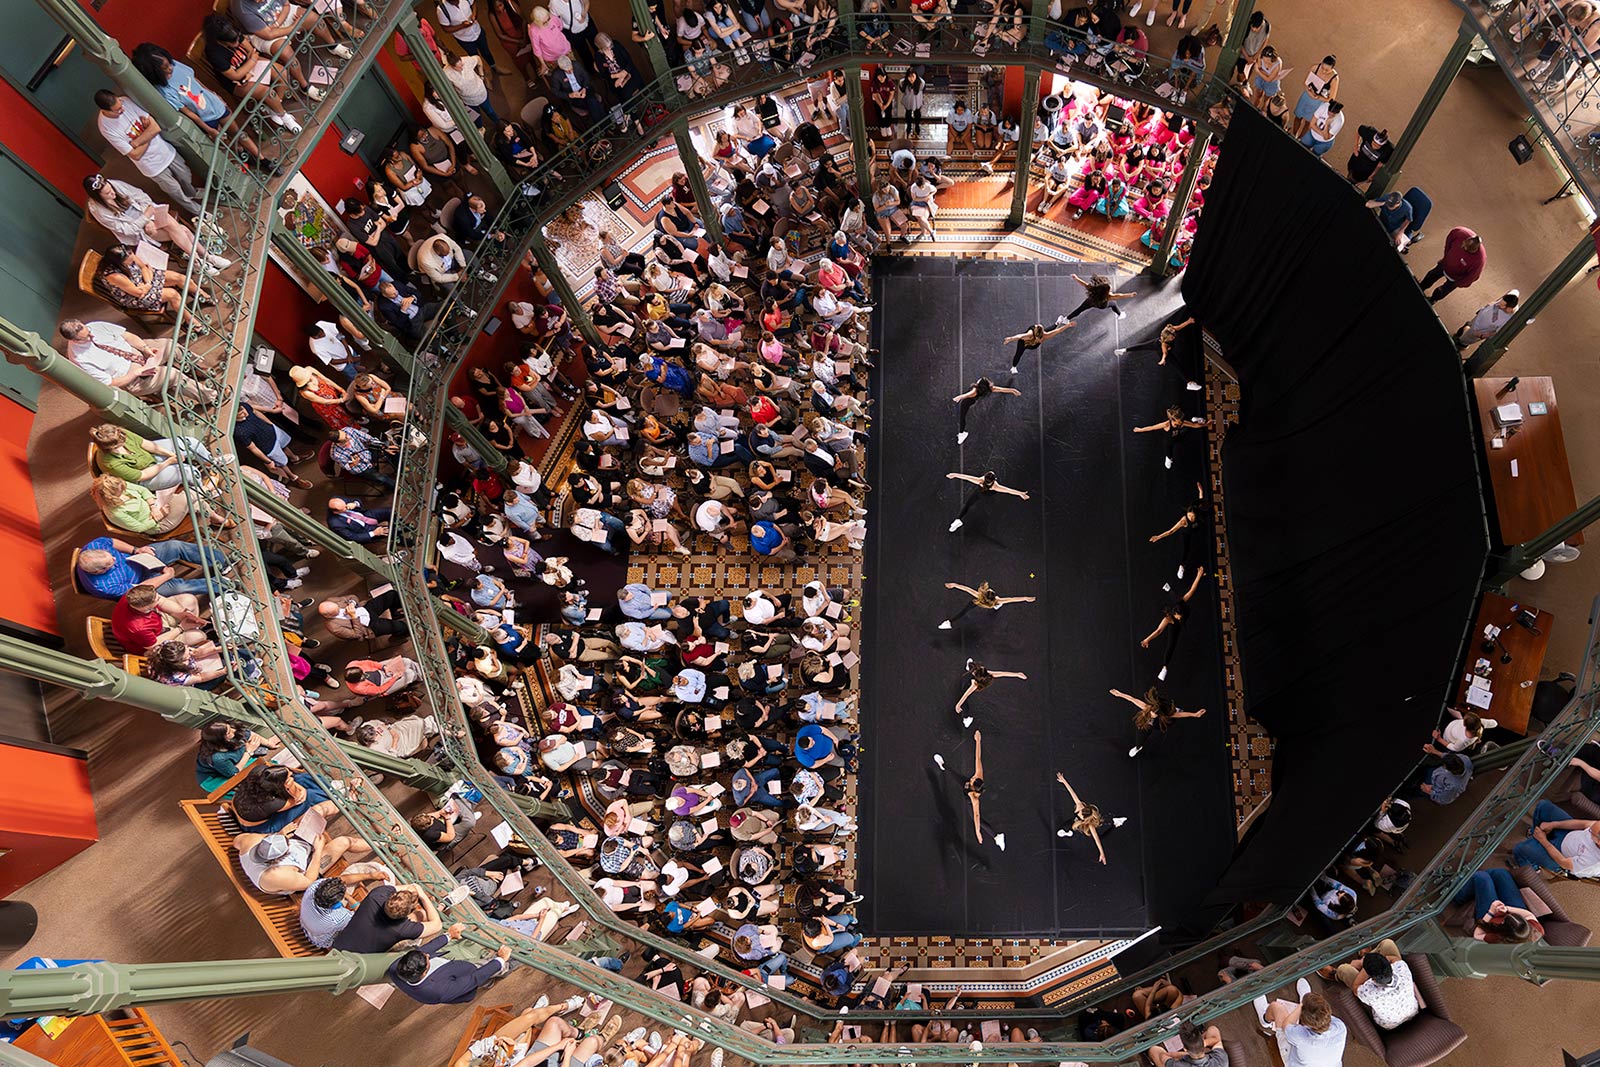 A view from the second floor of the Nott Memorial of a dance performance below.